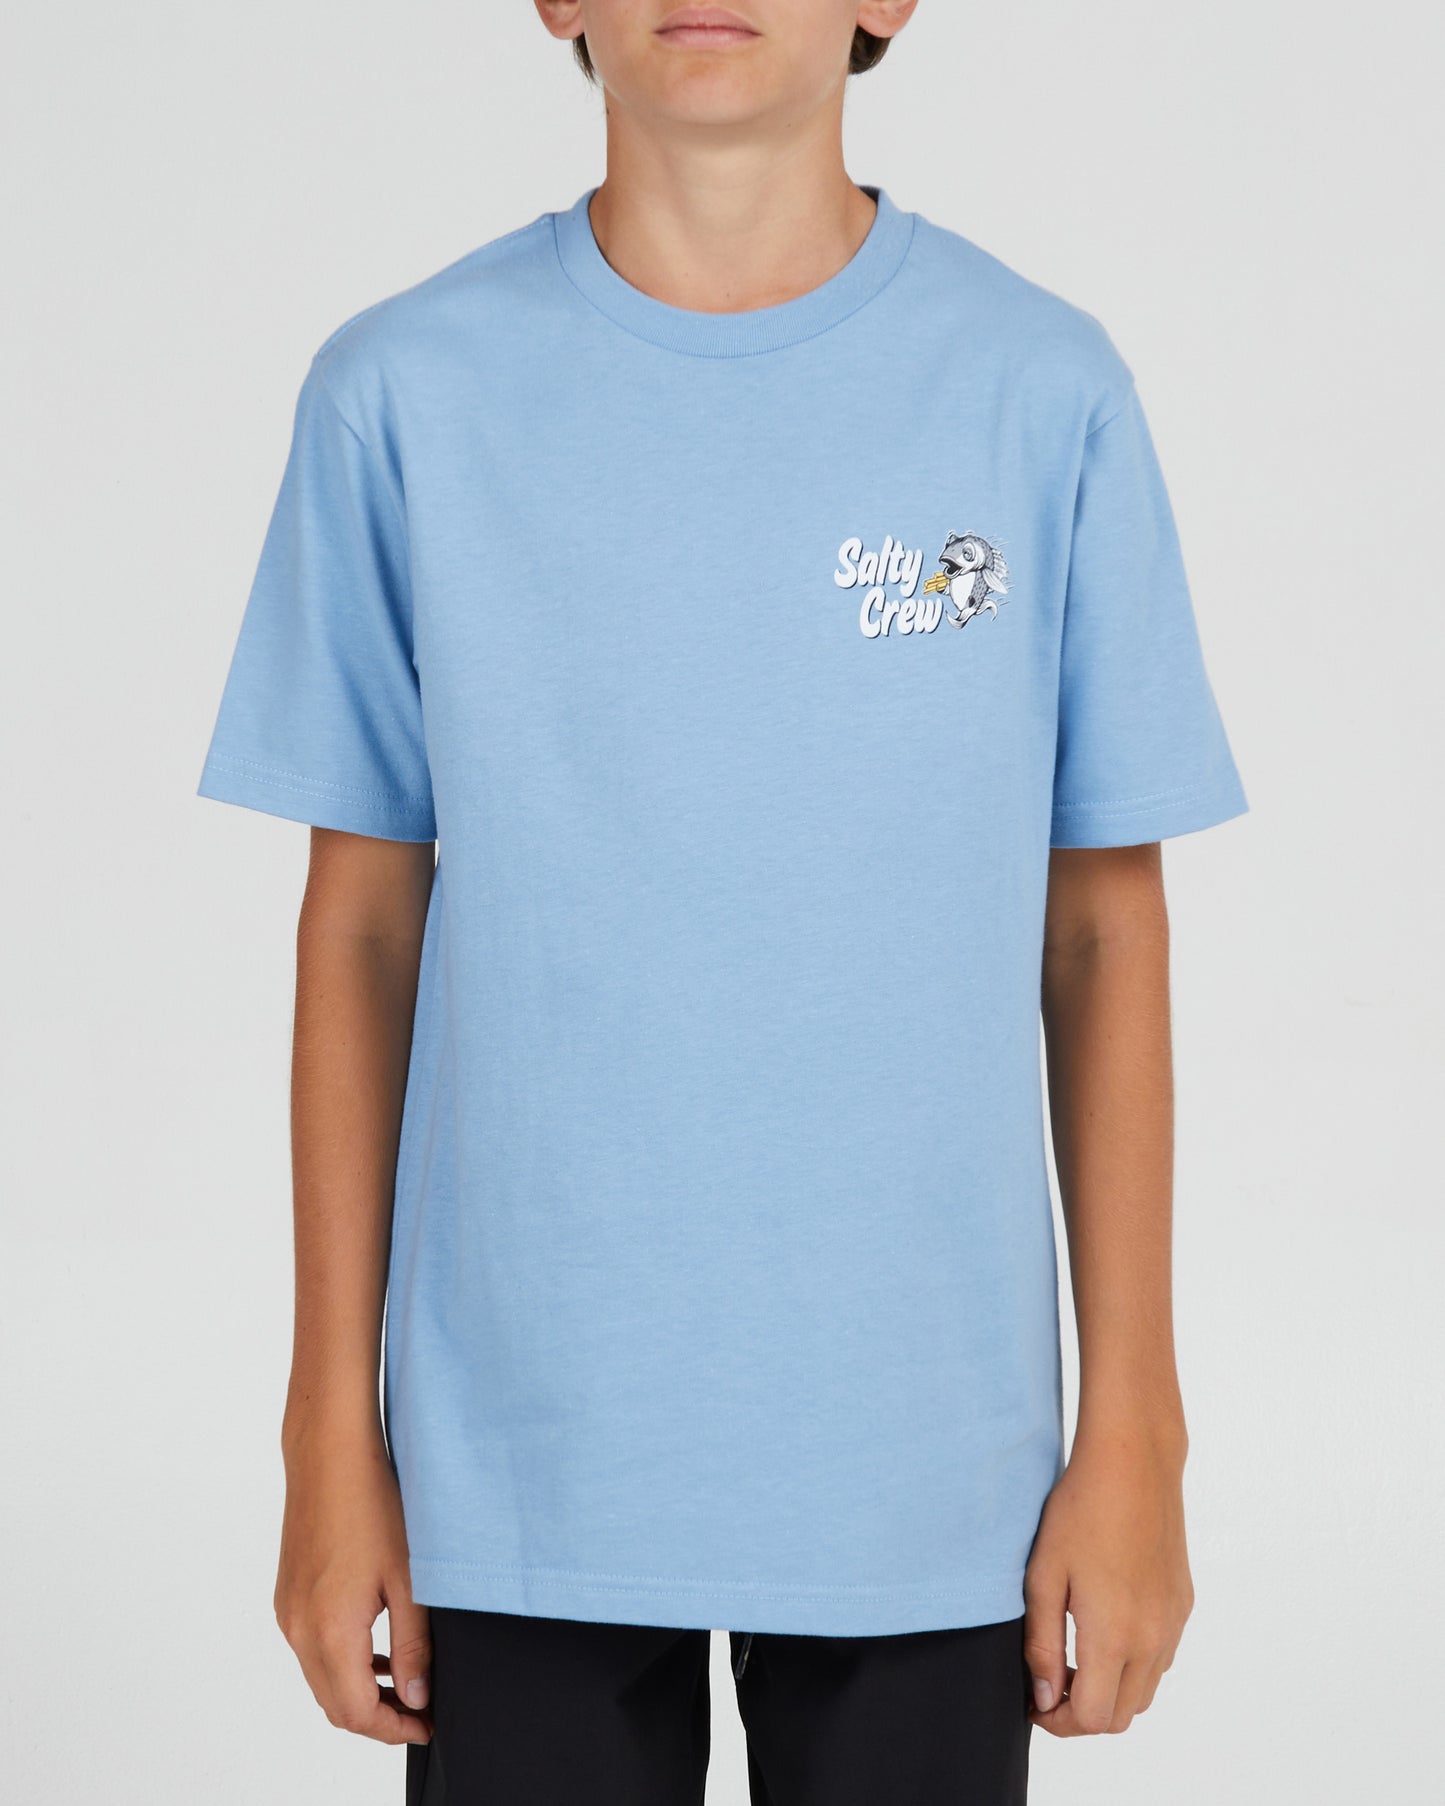 On body front of the Fish And Chips Boys Marine Blue S/S Tee